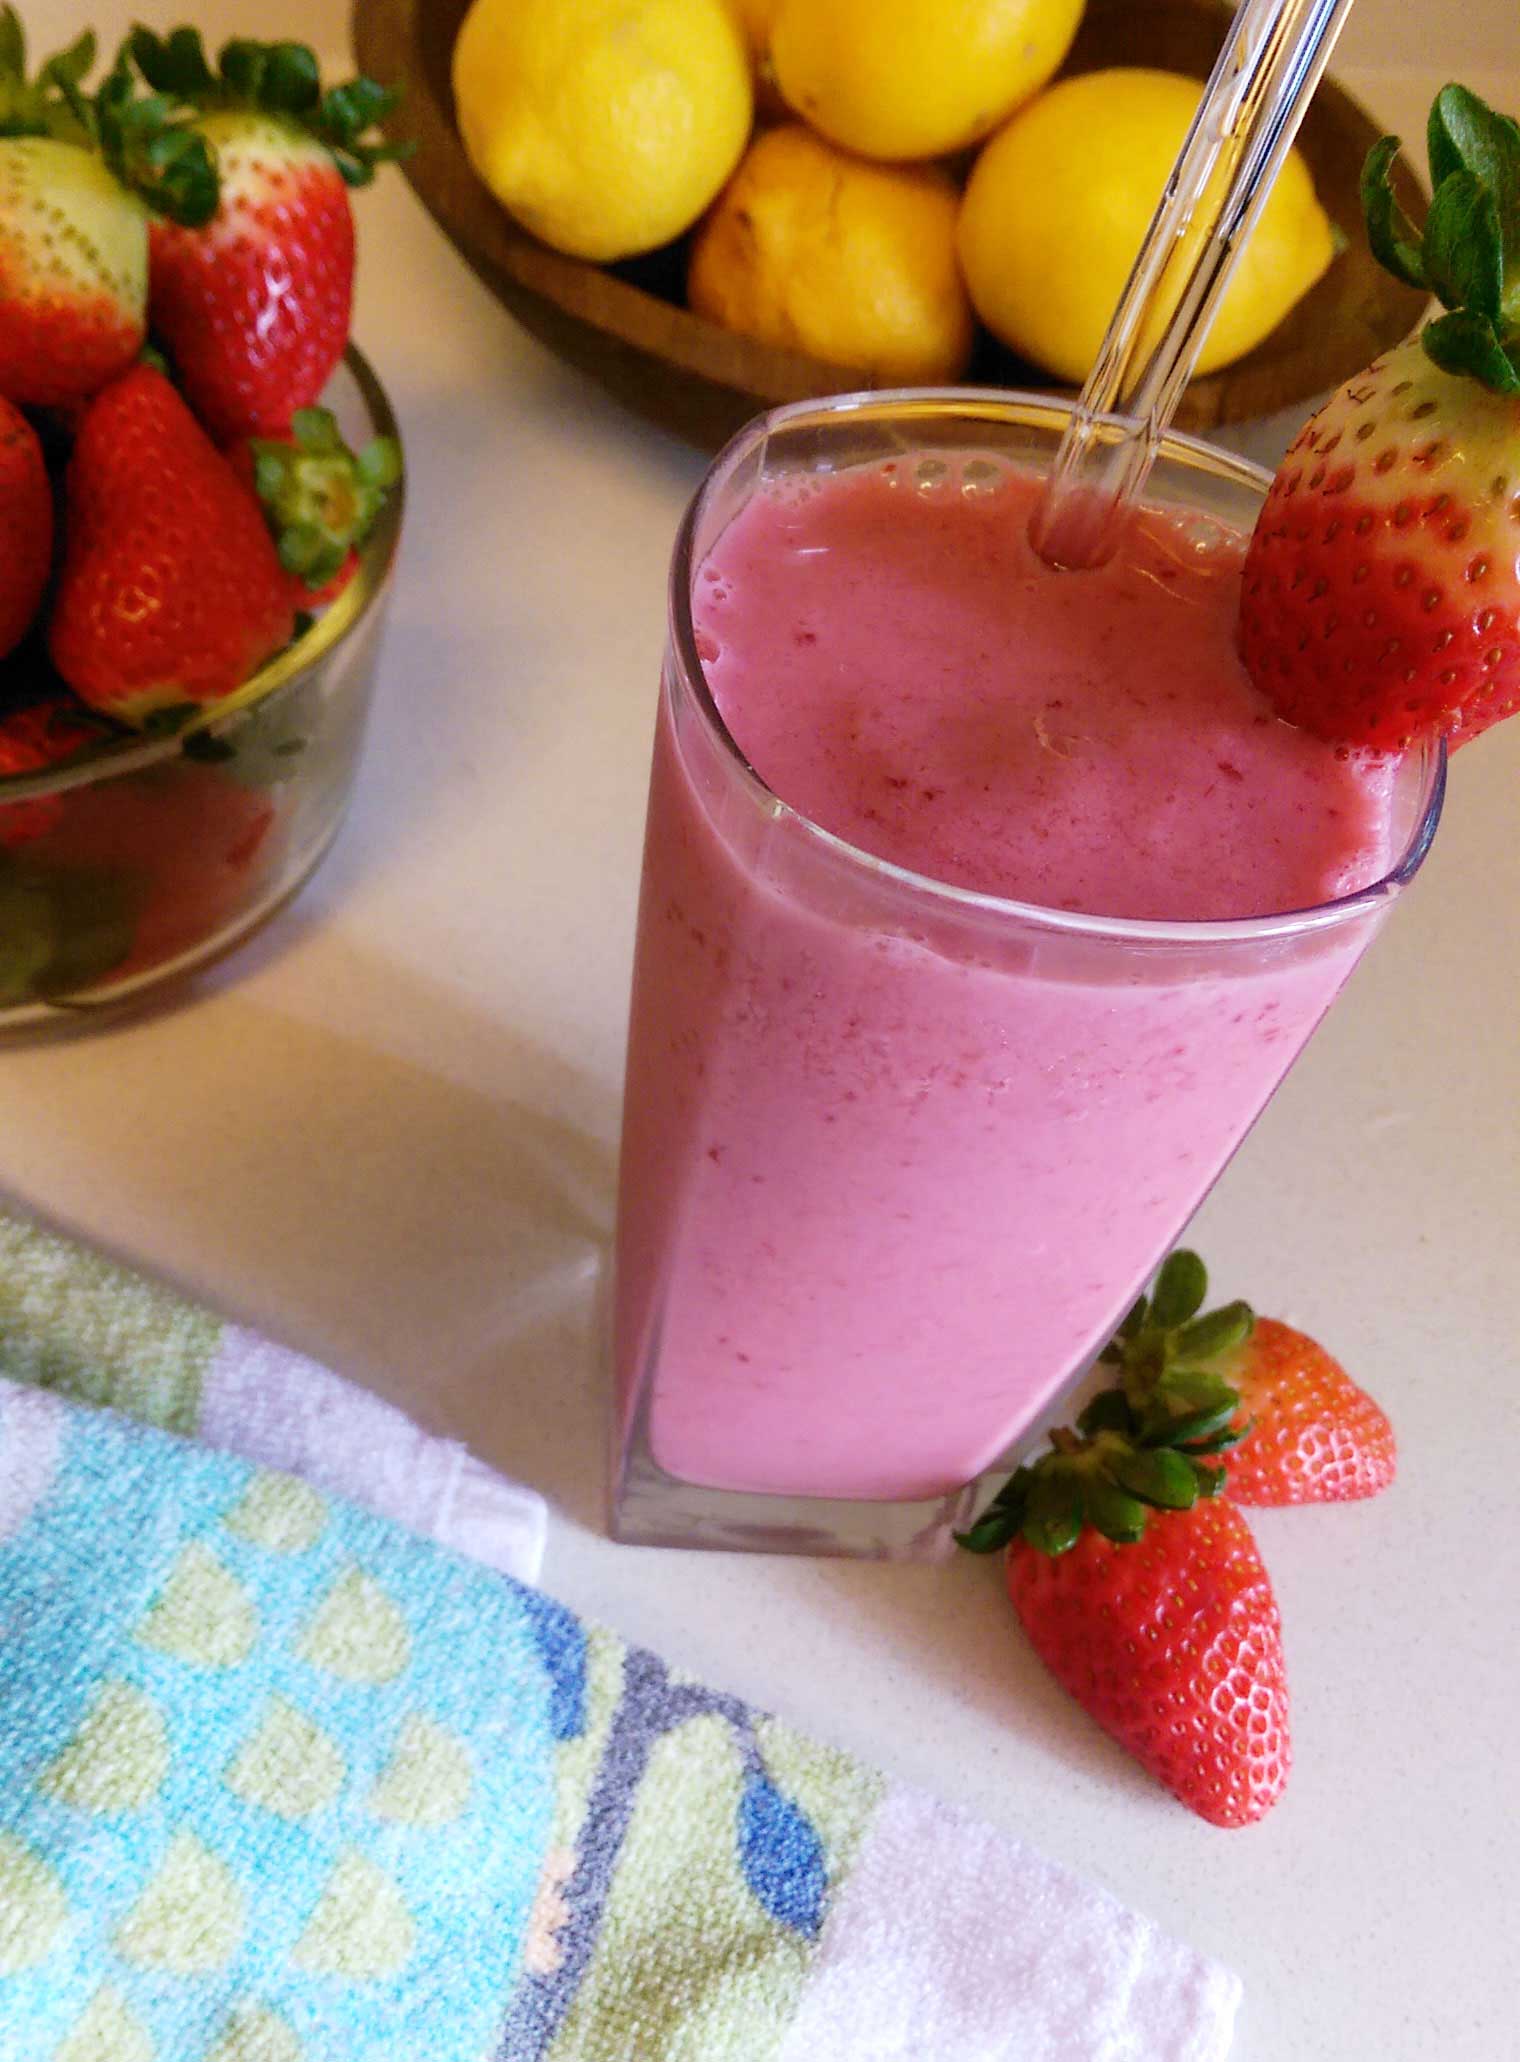 Home / Healthy Recipes / Smoothies / Spring and Summer Smoothie